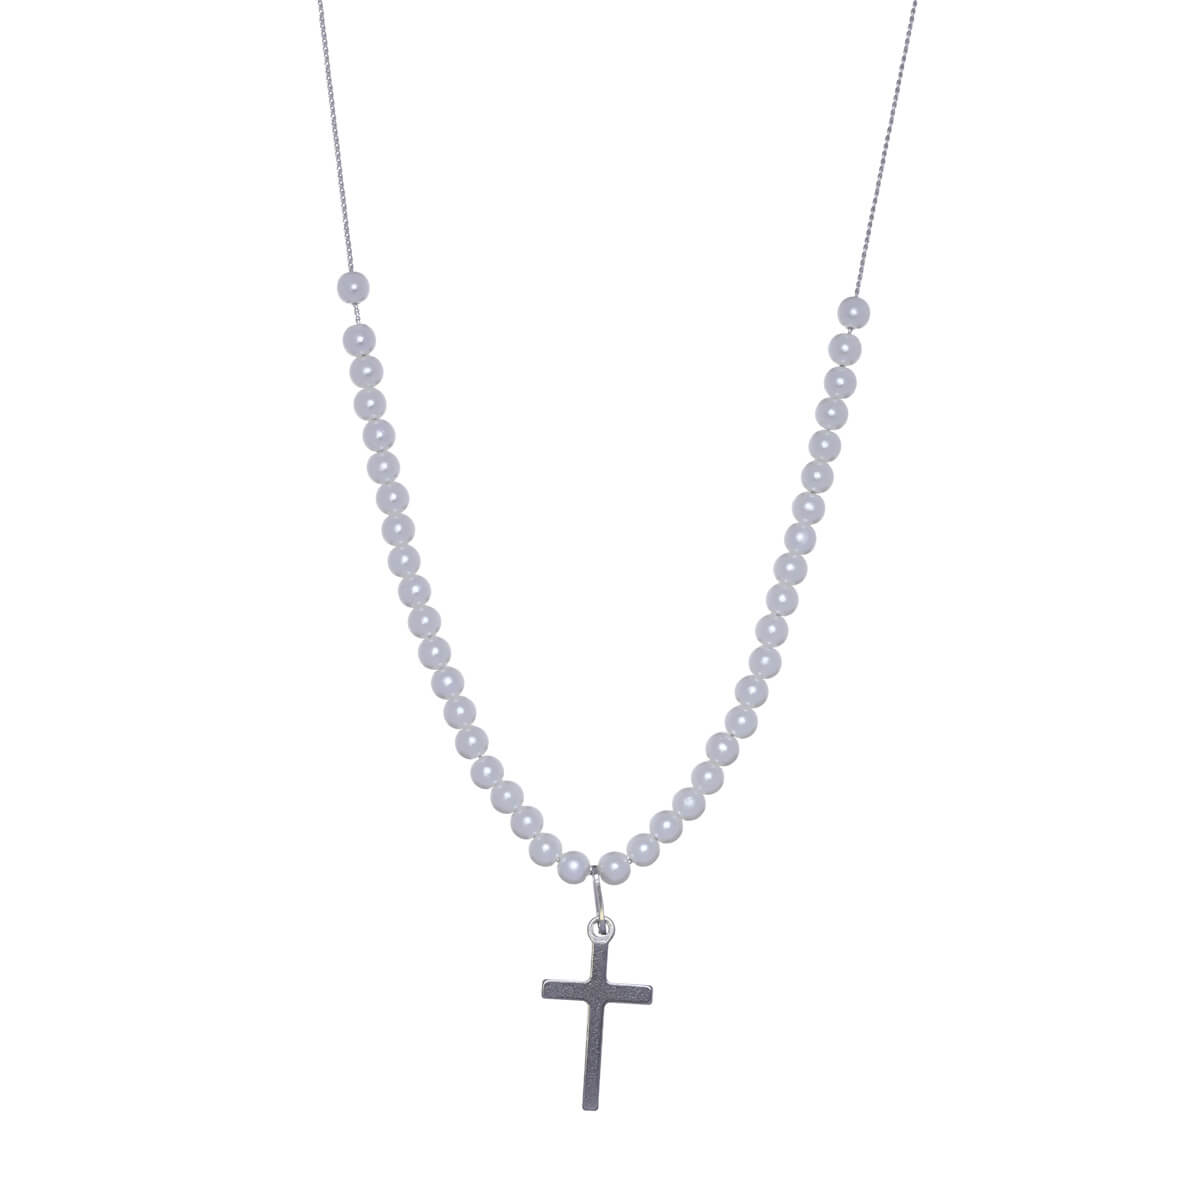 Pearl necklace with cross pendant 52cm (steel 316L)